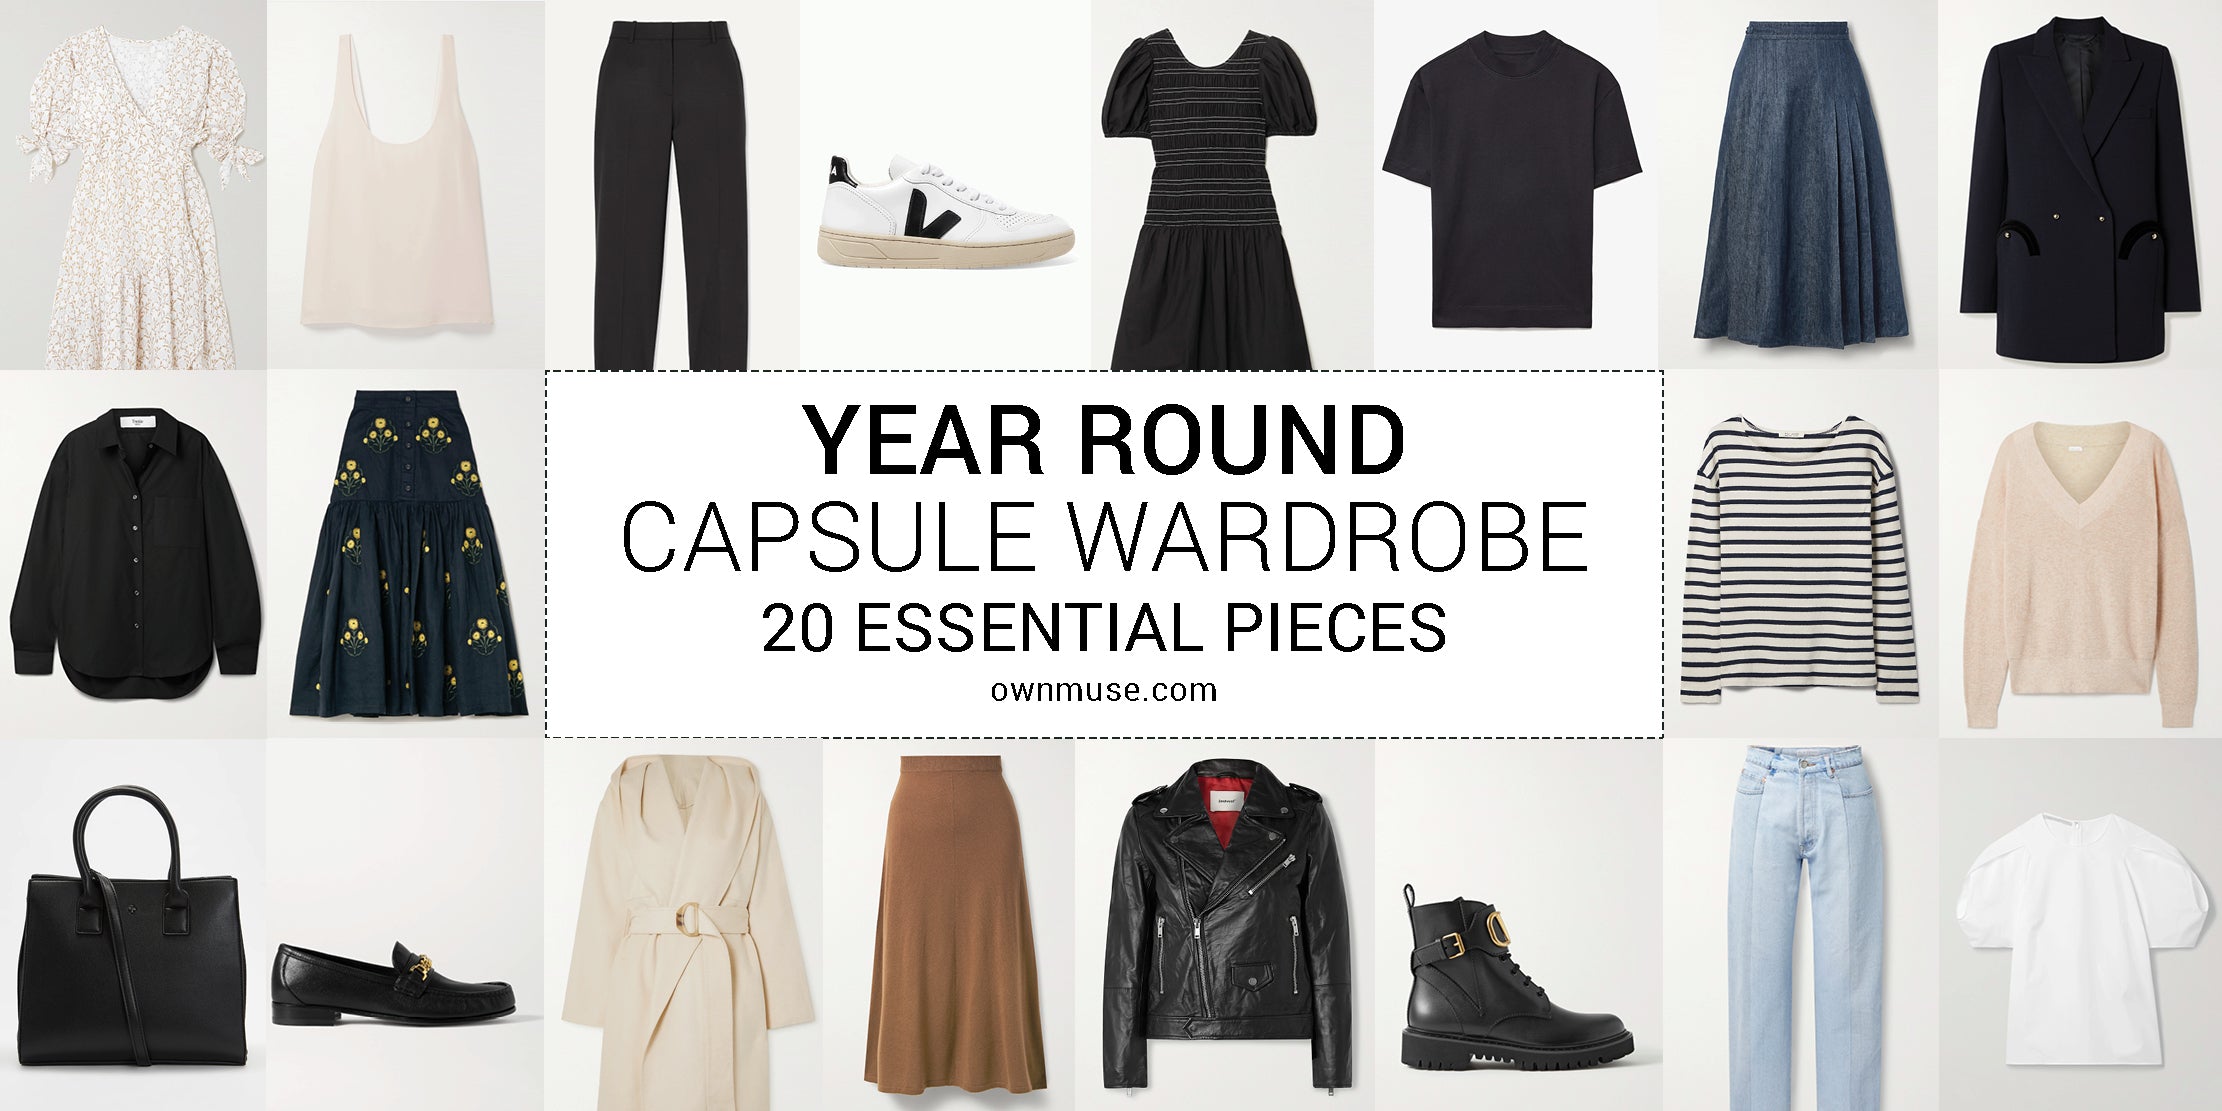 15 Casual Work Outfits That Make Office Dressing Effortless